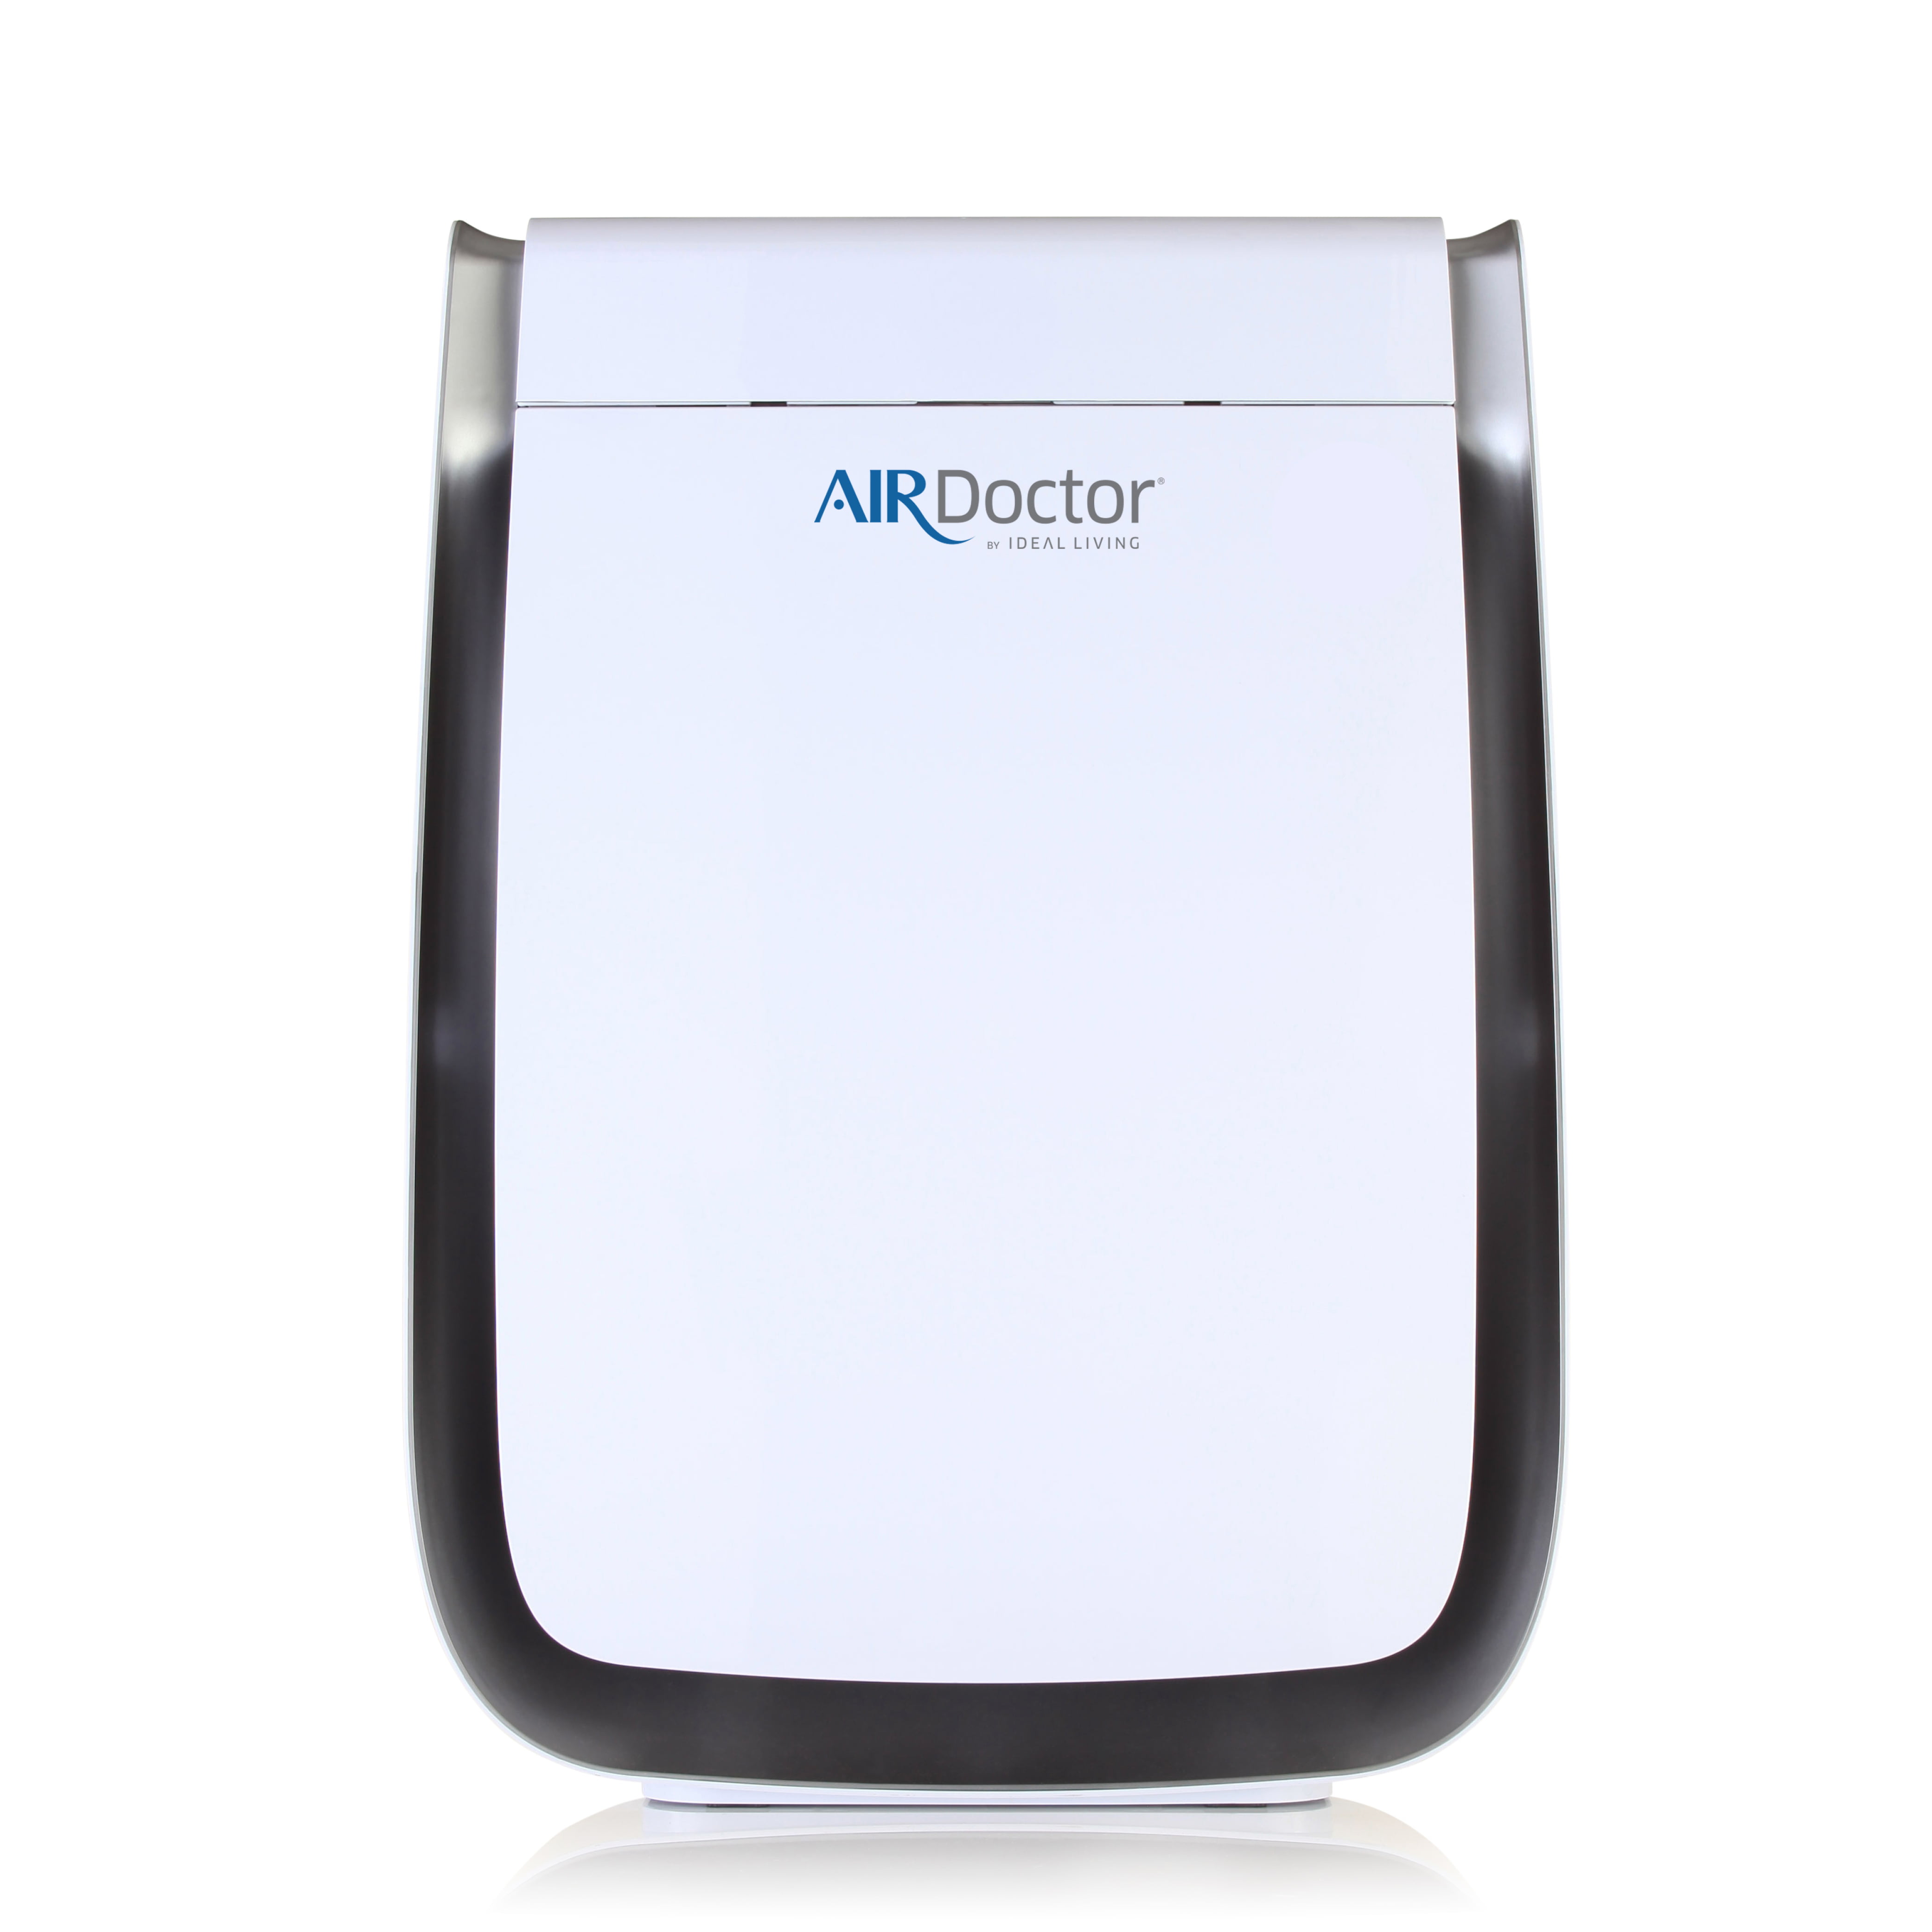 AIRDOCTOR AD3000 Air Purifiers for Home & Large Rooms Up to sq. ft